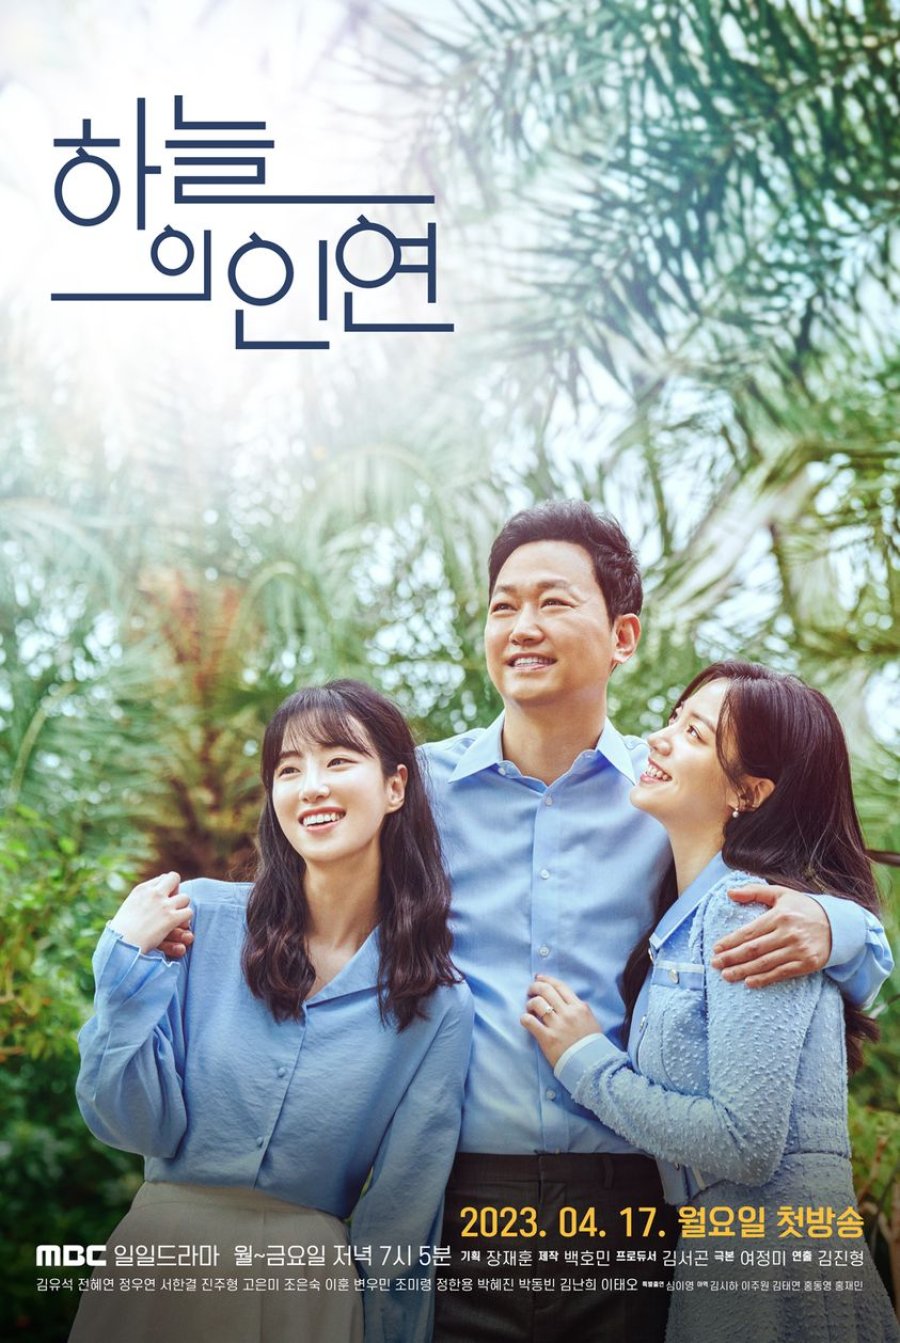 Meant To Be (2023) - 하늘의 인연